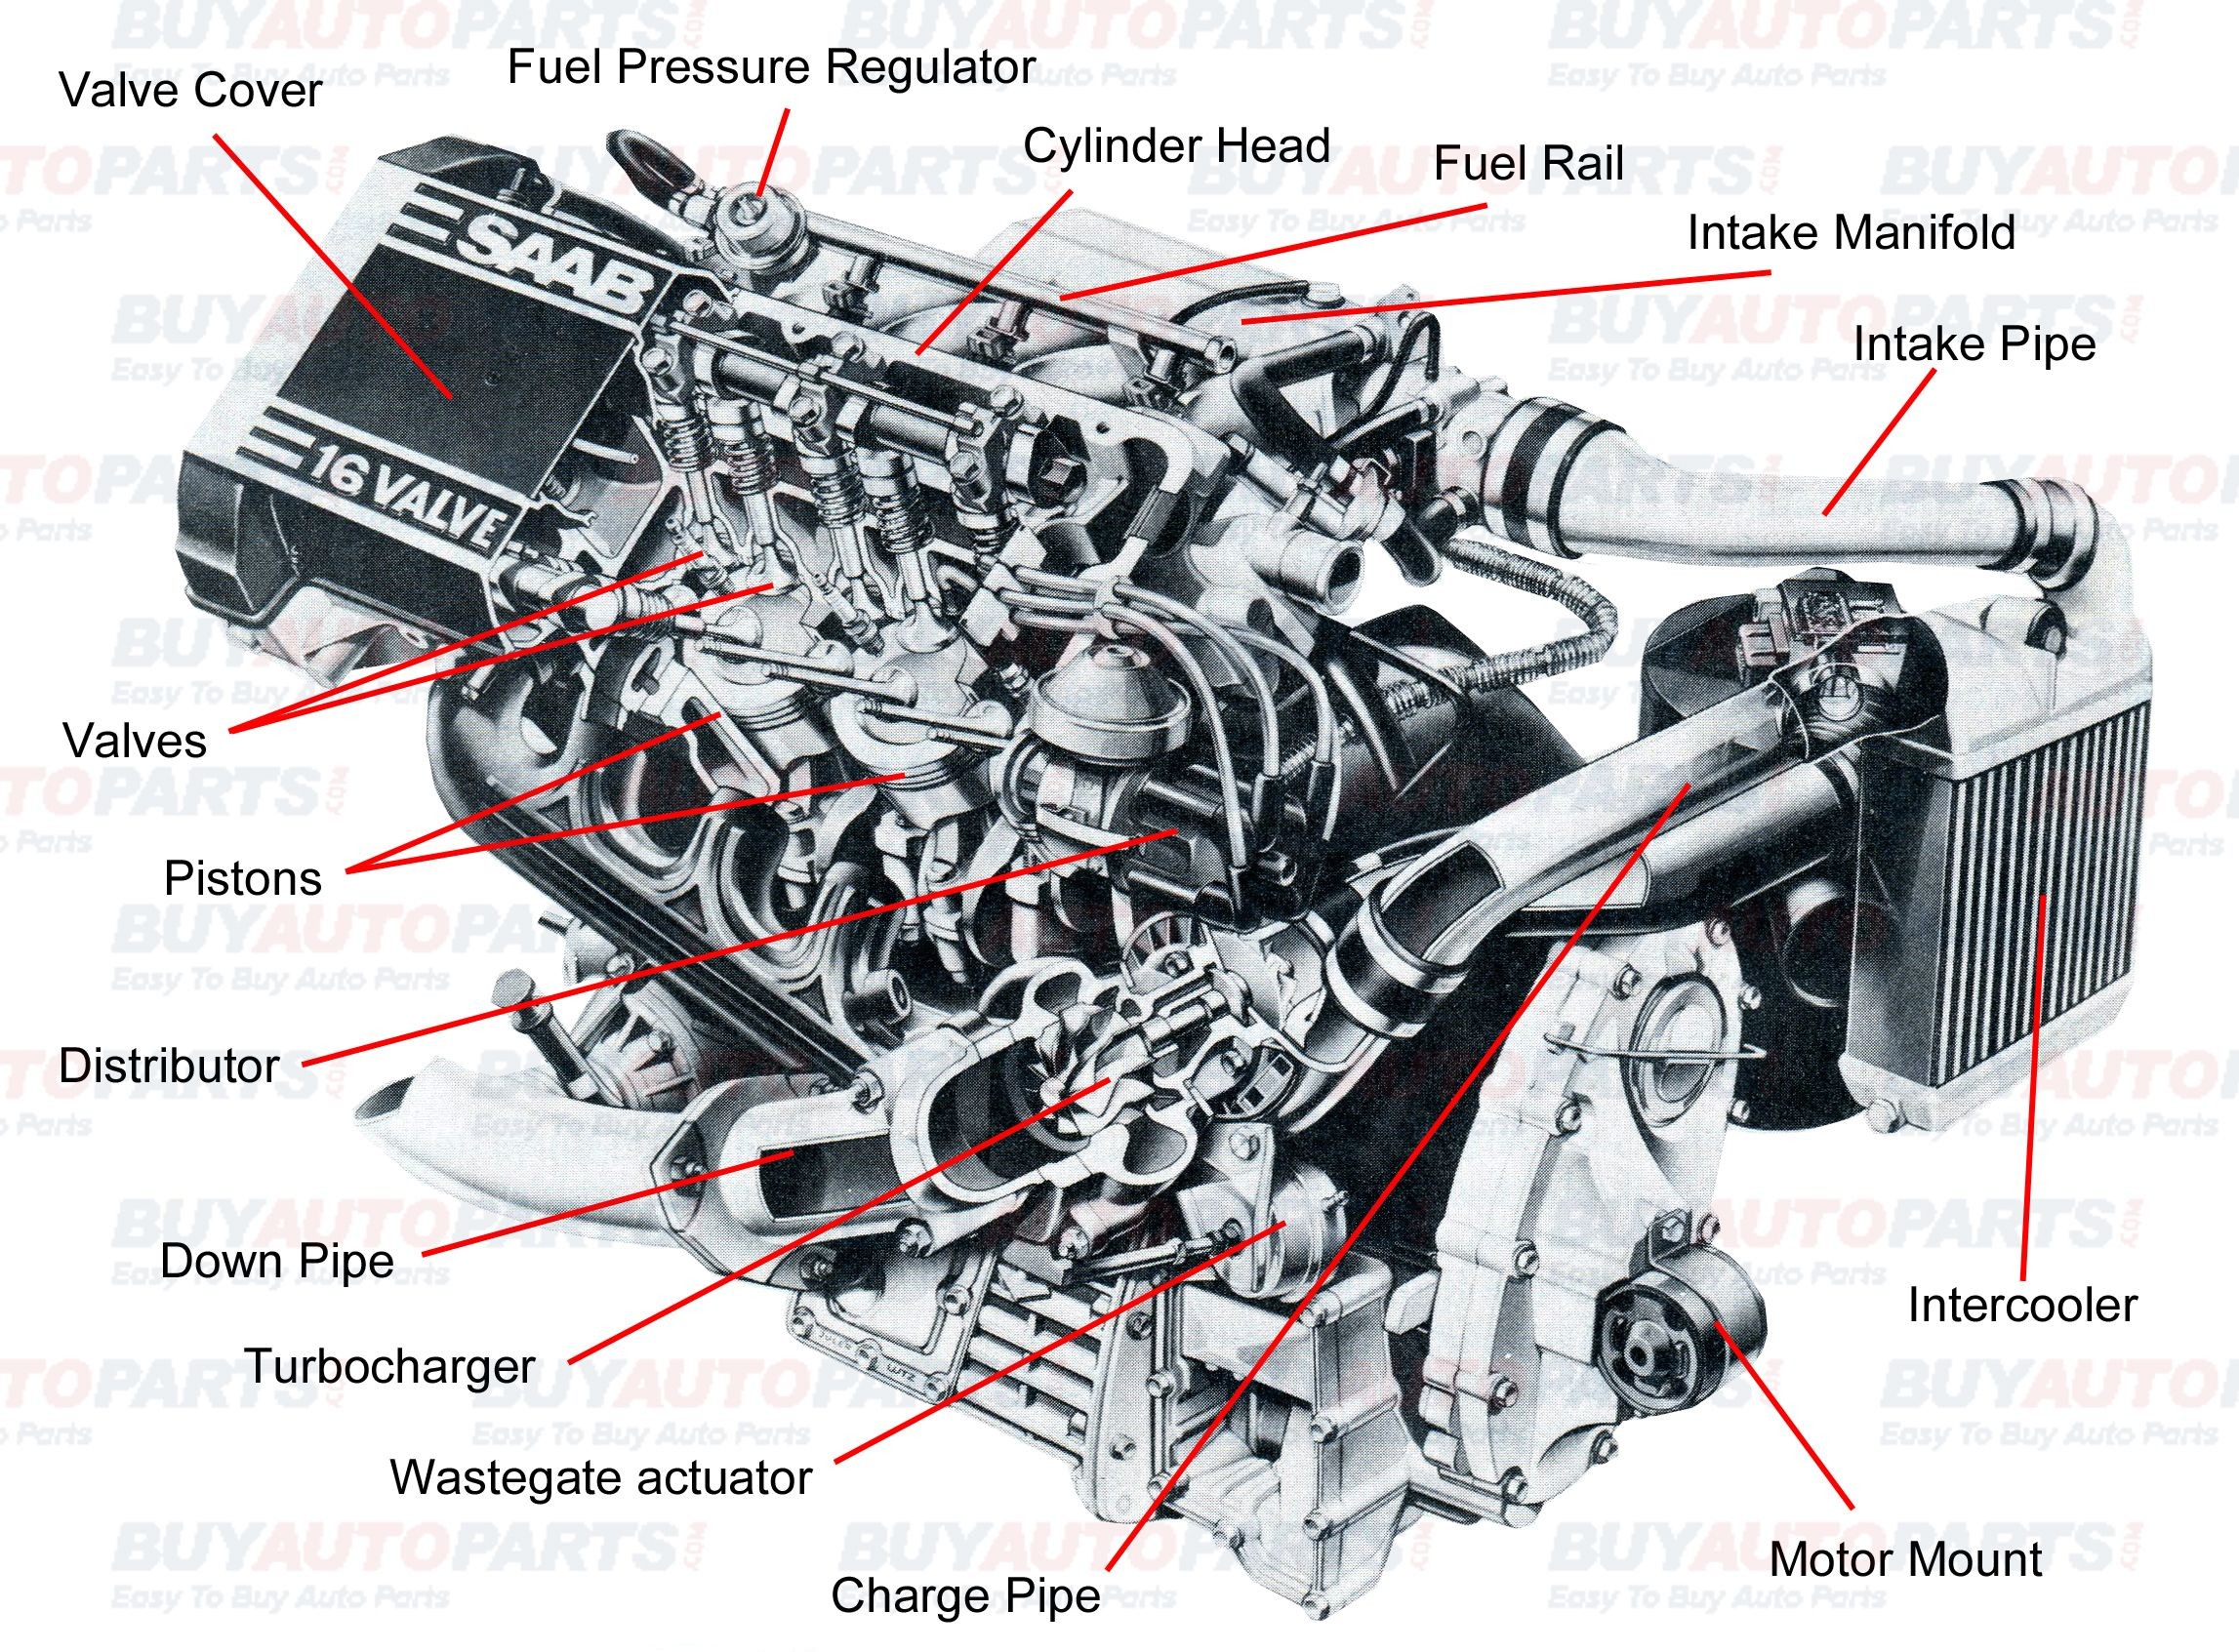 Diesel Engine Components Diagram All Internal Bustion Engines Have the Same Basic Ponents the Of Diesel Engine Components Diagram